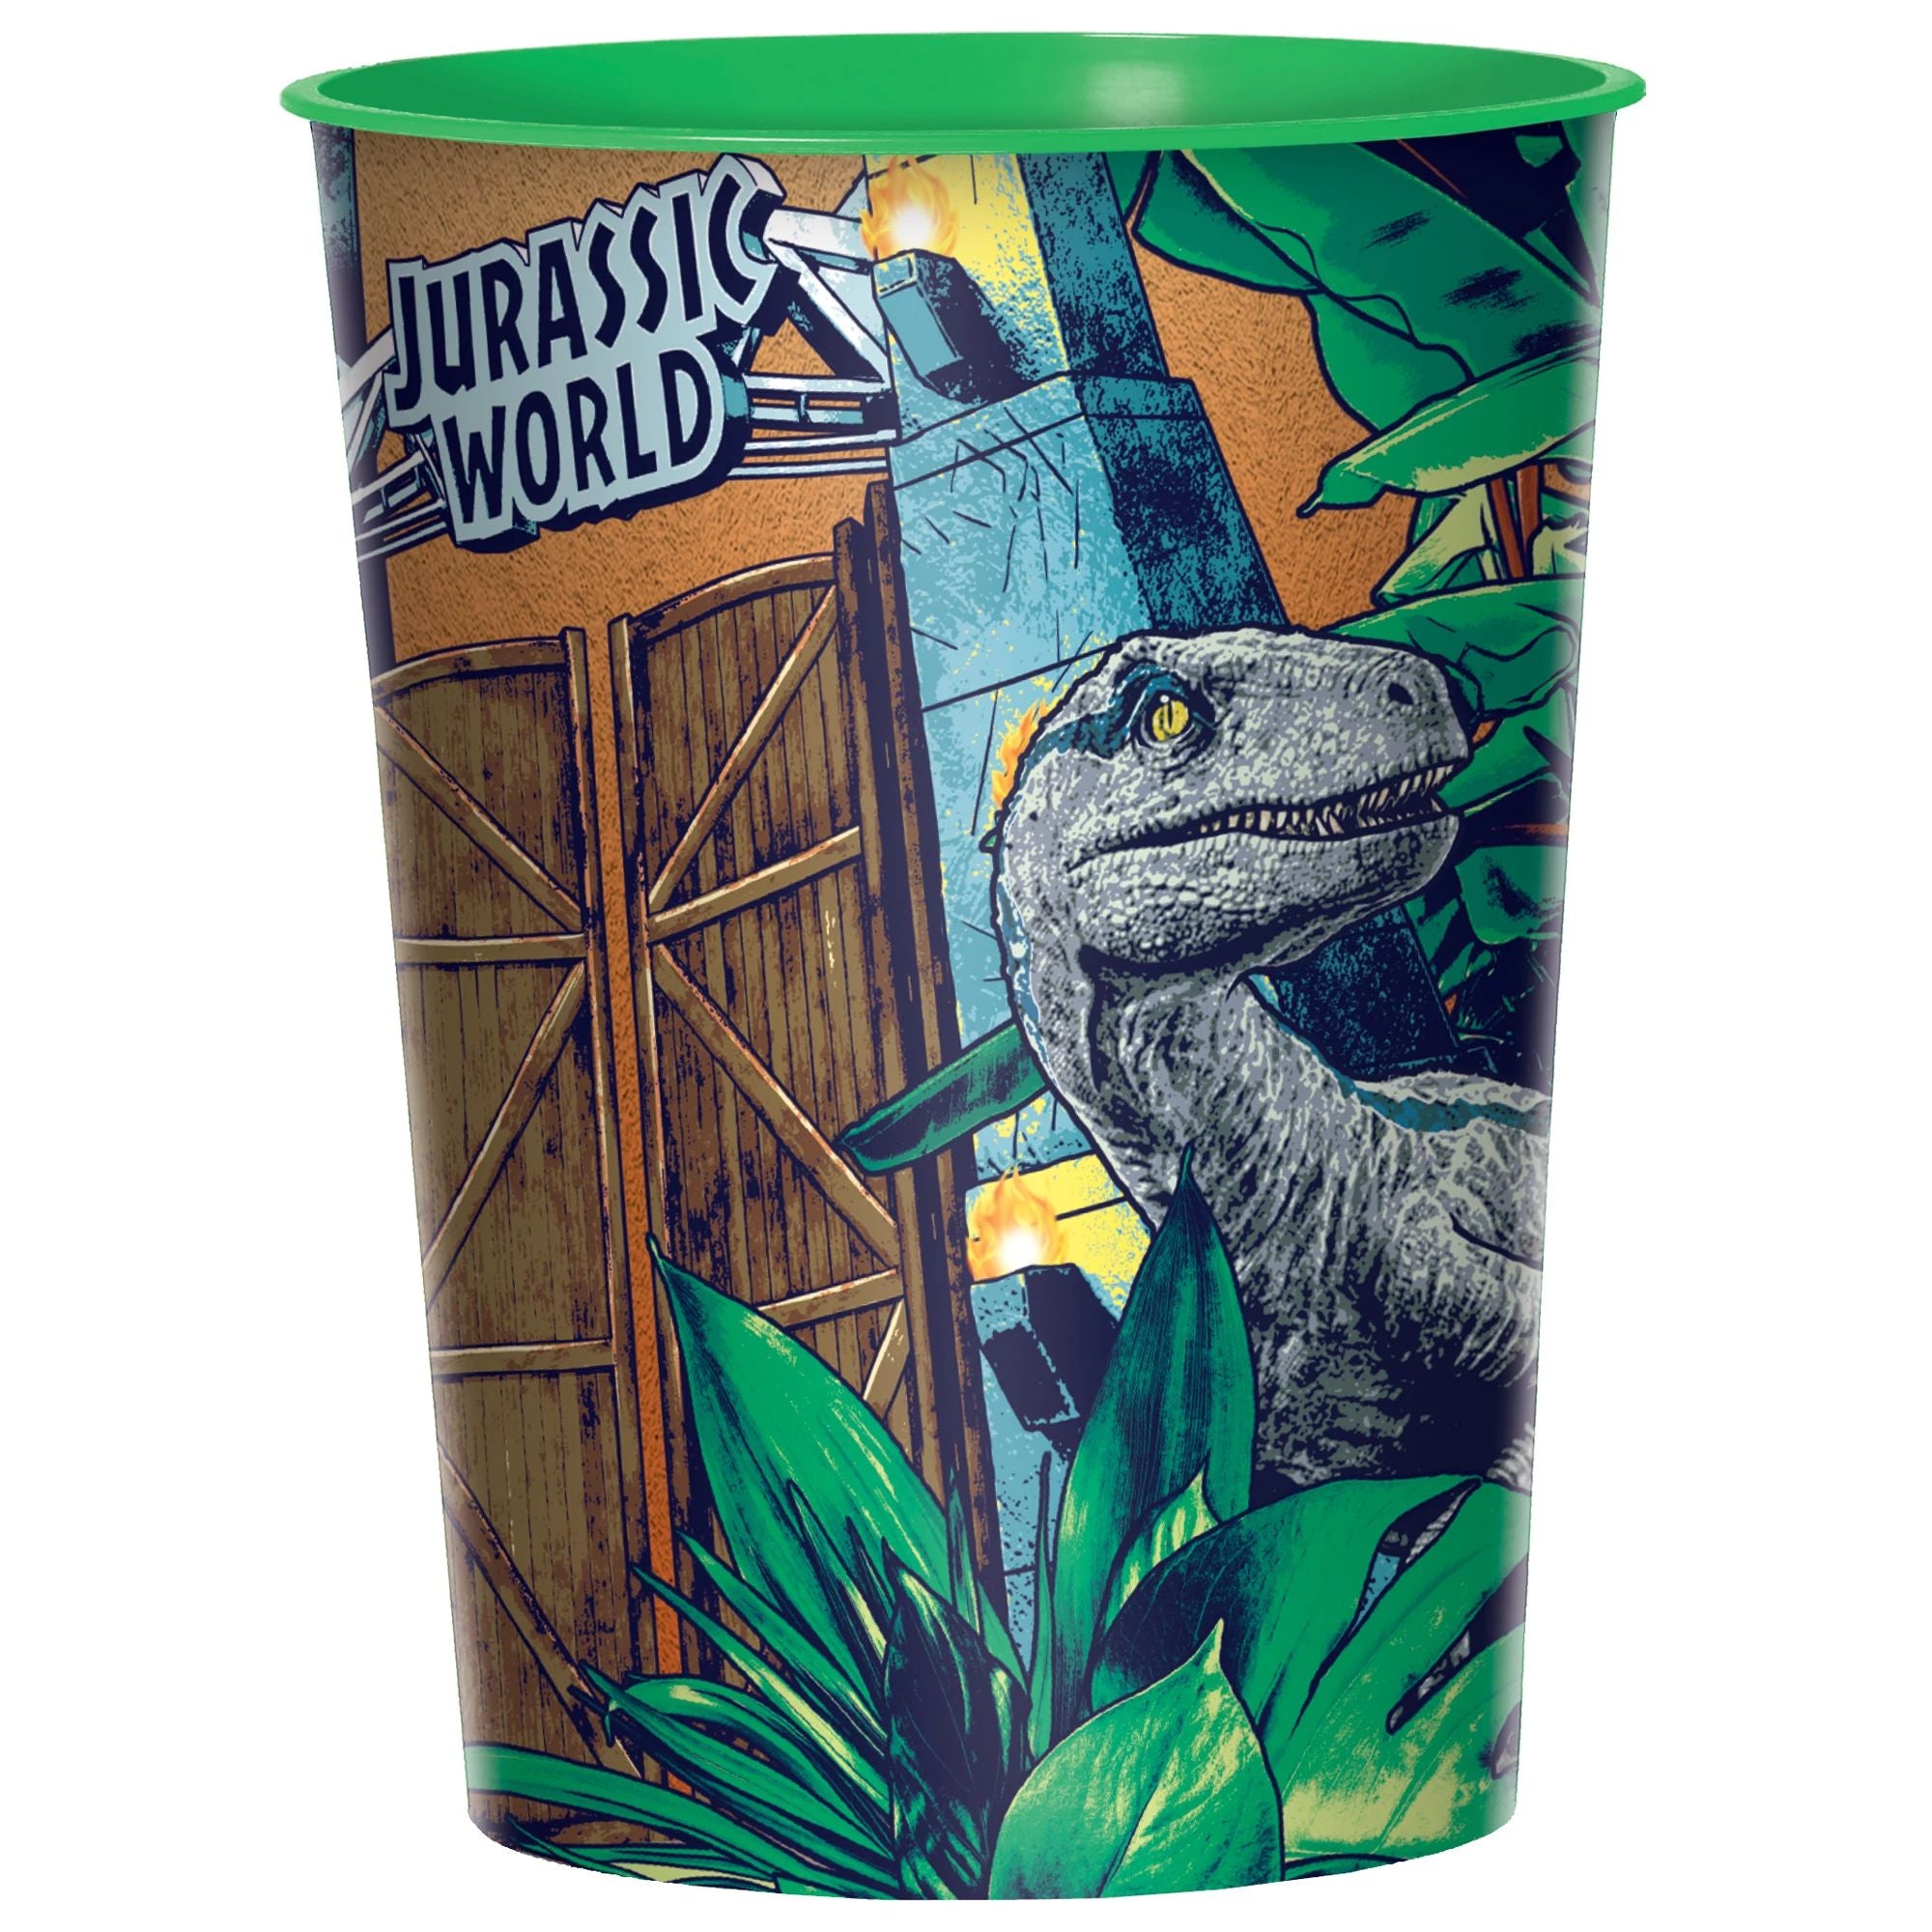 Jurassic World Into the Wild Plastic Favor Cup 1pc